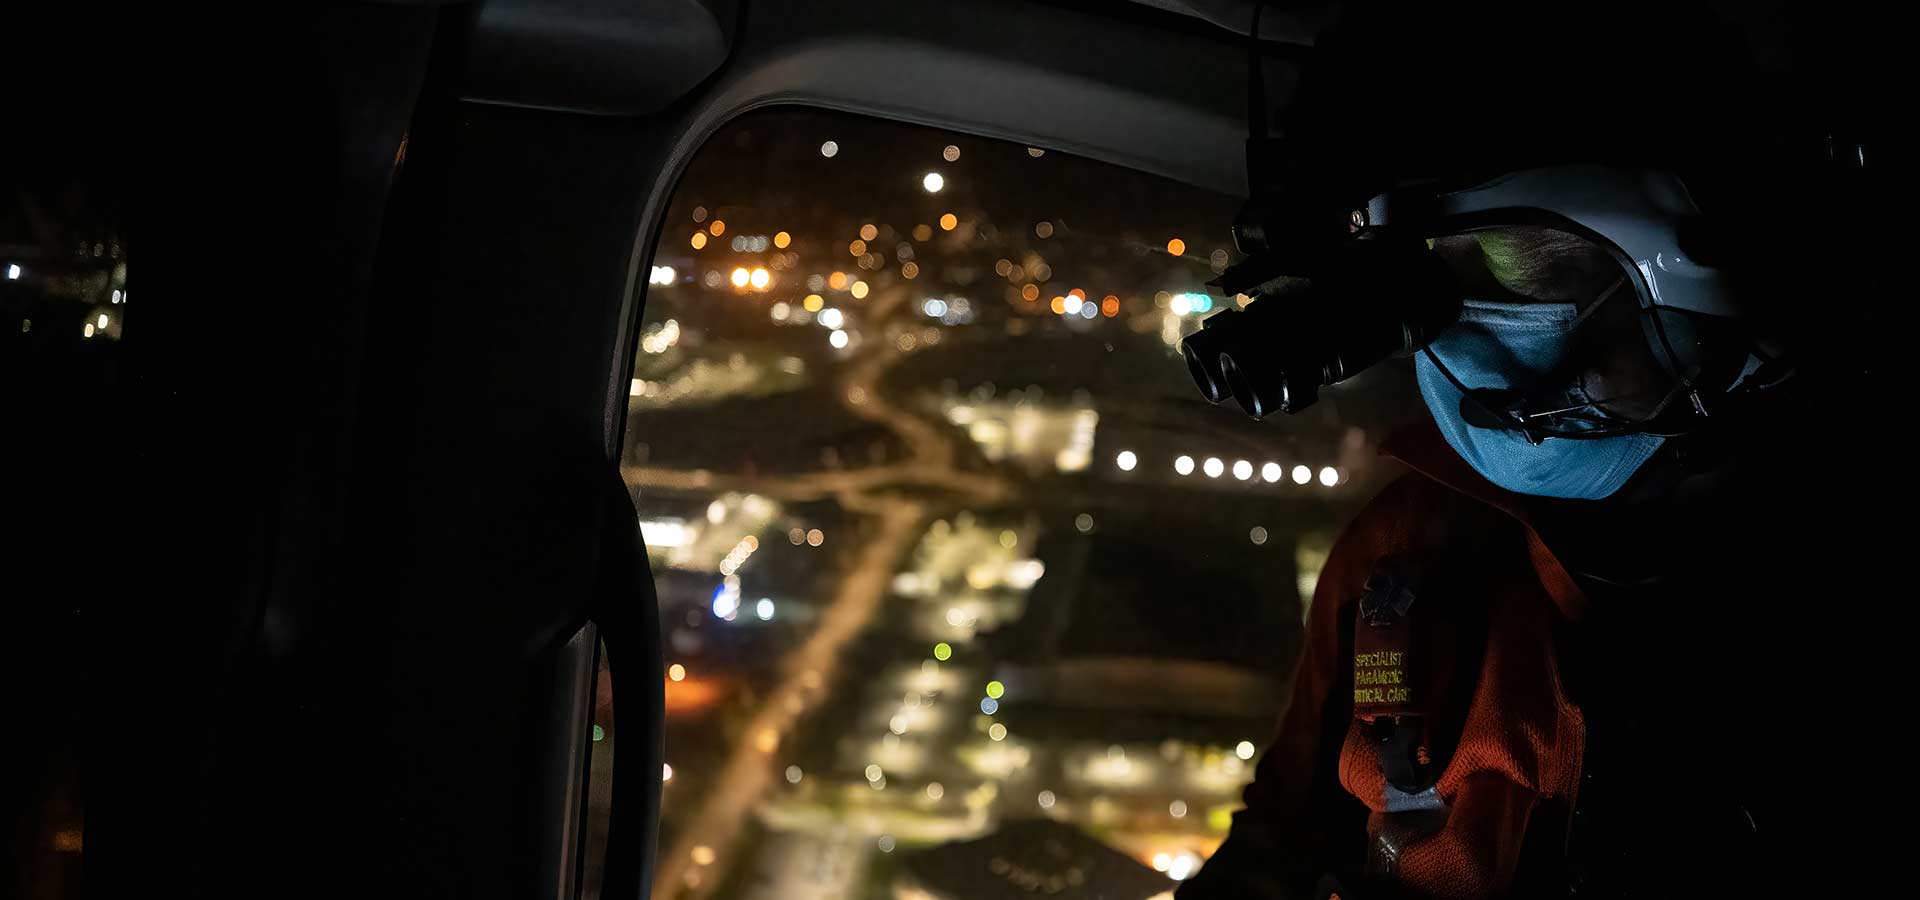 Helicopter at night